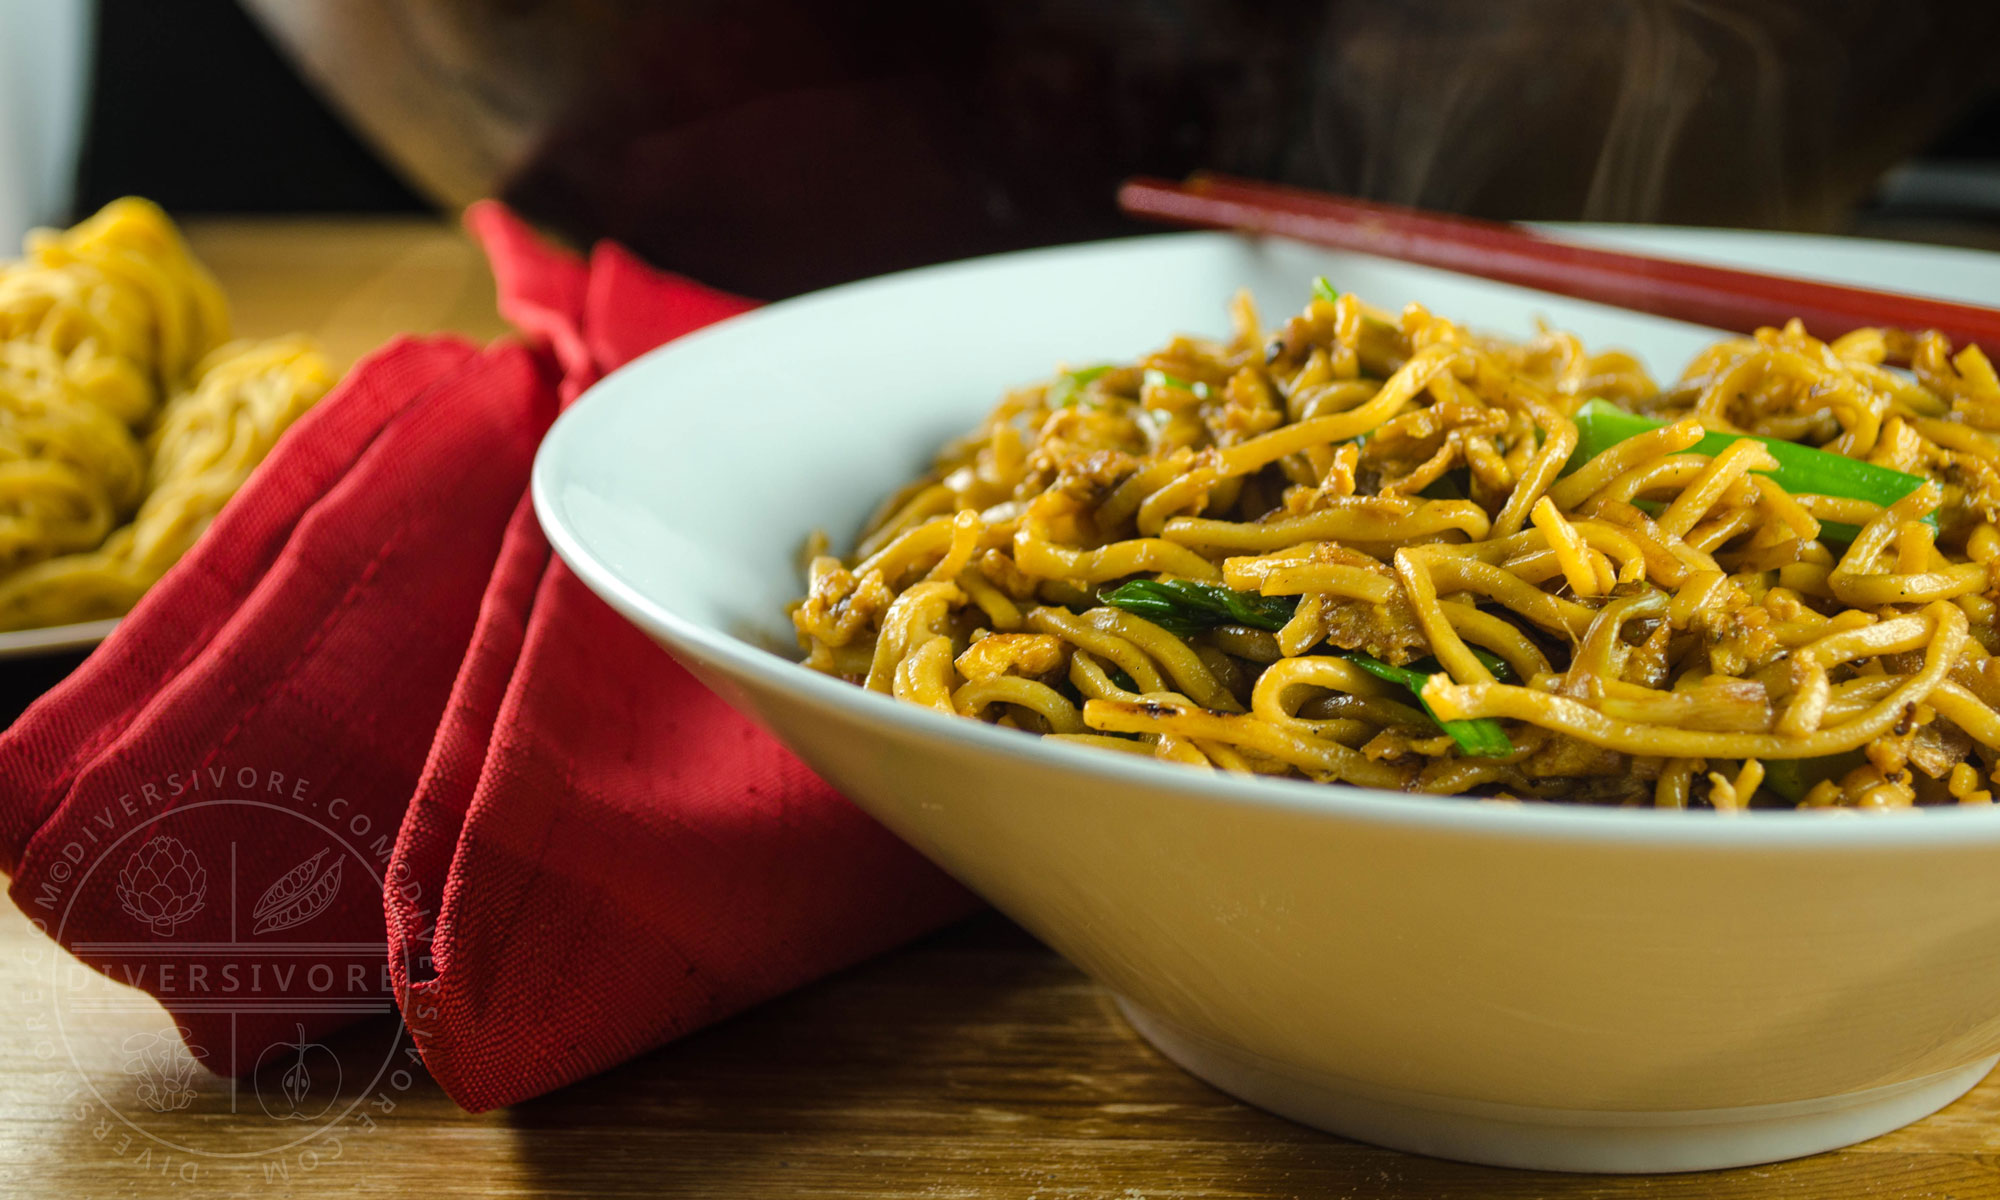 Soy sauce fried noodles in a white bowl with red chopsticks and a folded red napkin